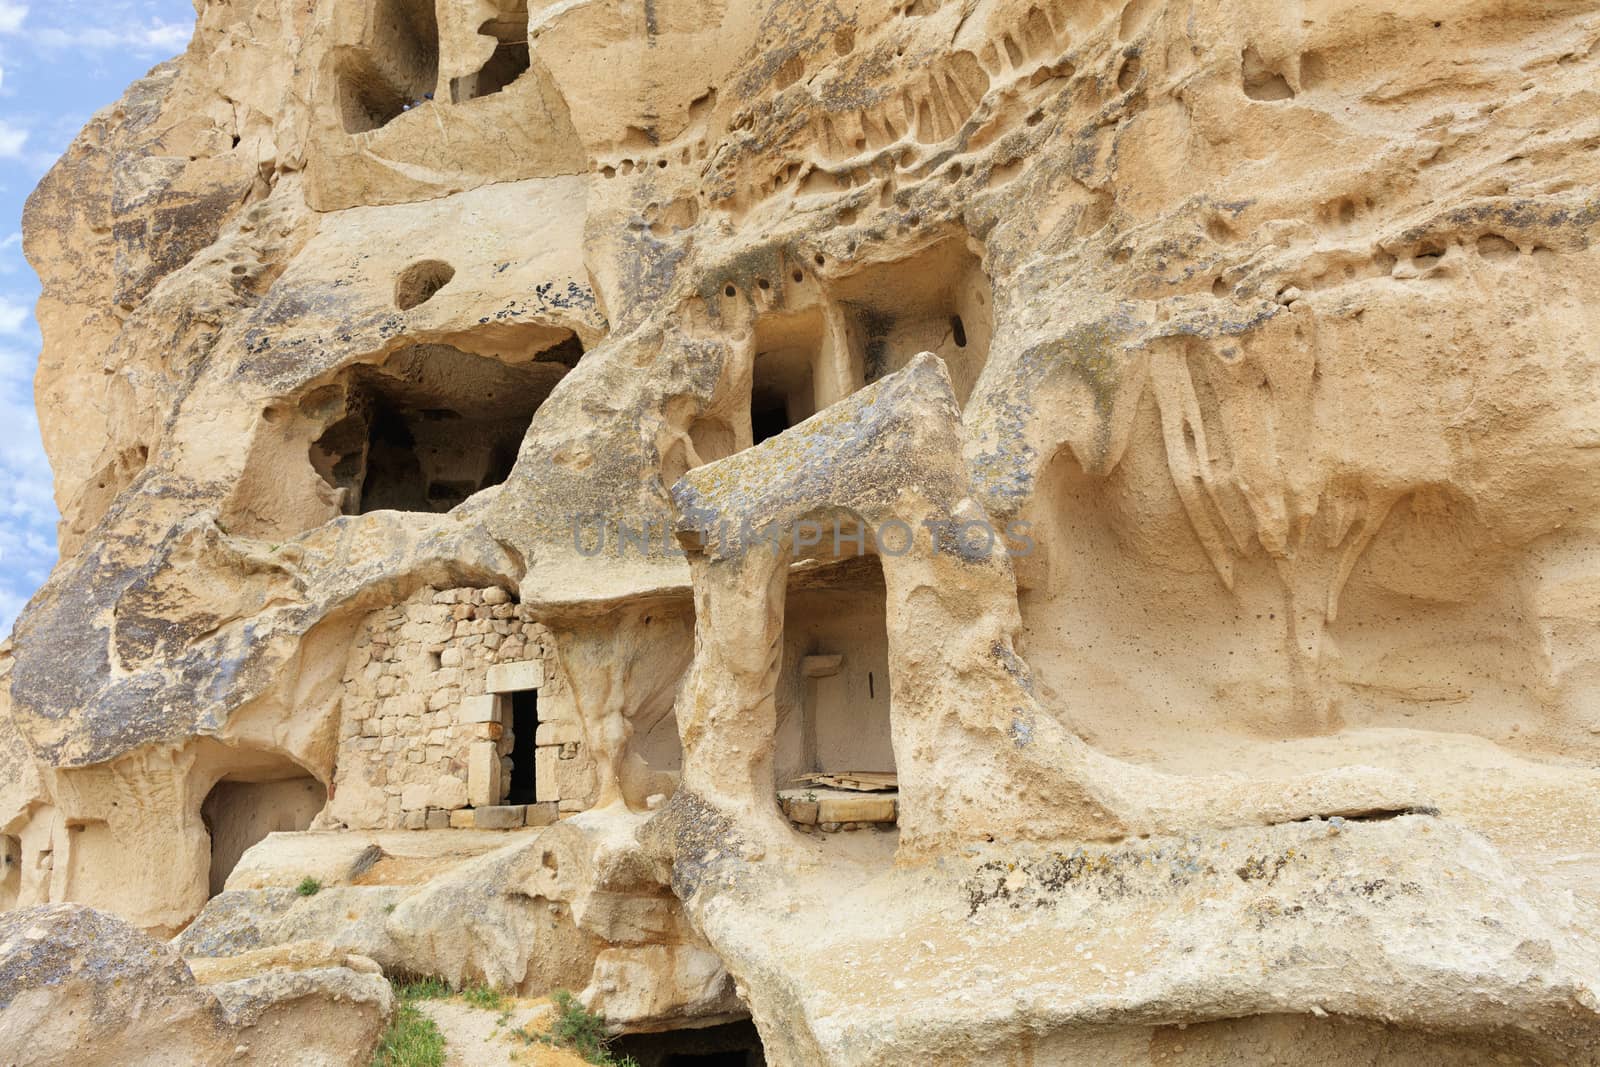 Many corridors and rooms are hollowed out in an old antique rock in the valley of Cappadocia, close-up view.